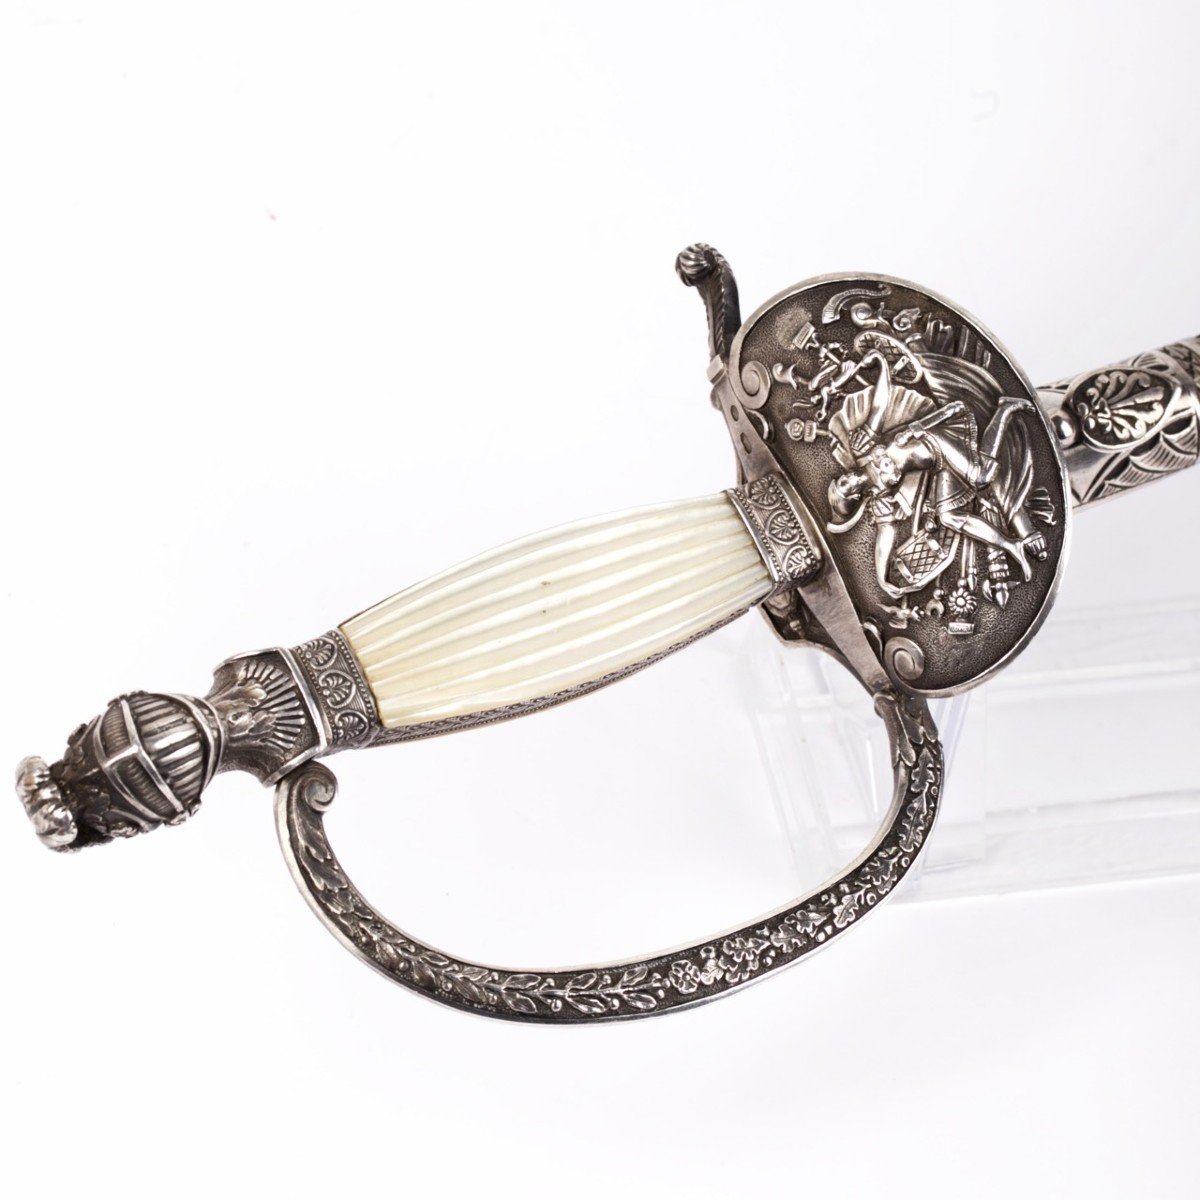 A French Mounted Fine Silver Sword With A Gilt Blade Belonged To The Baron-photo-3